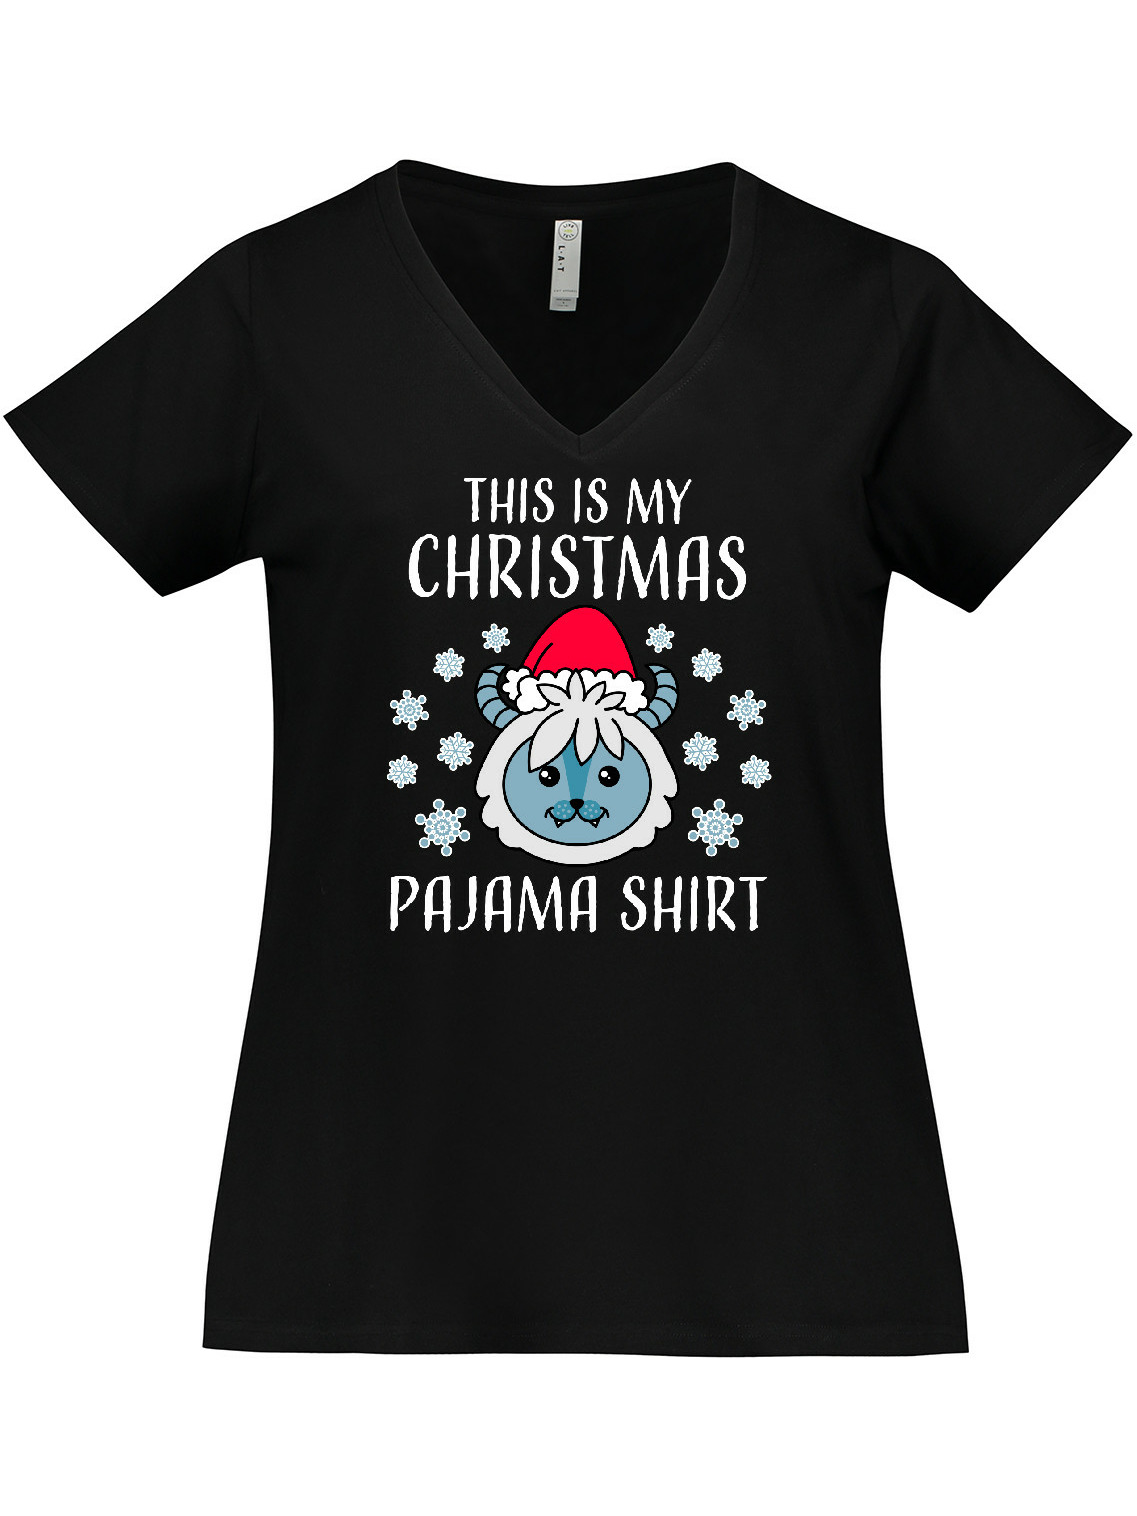 Inktastic This is My Christmas Pajama Shirt with Snow Monster Women's Plus Size V-Neck T-Shirt - image 1 of 4